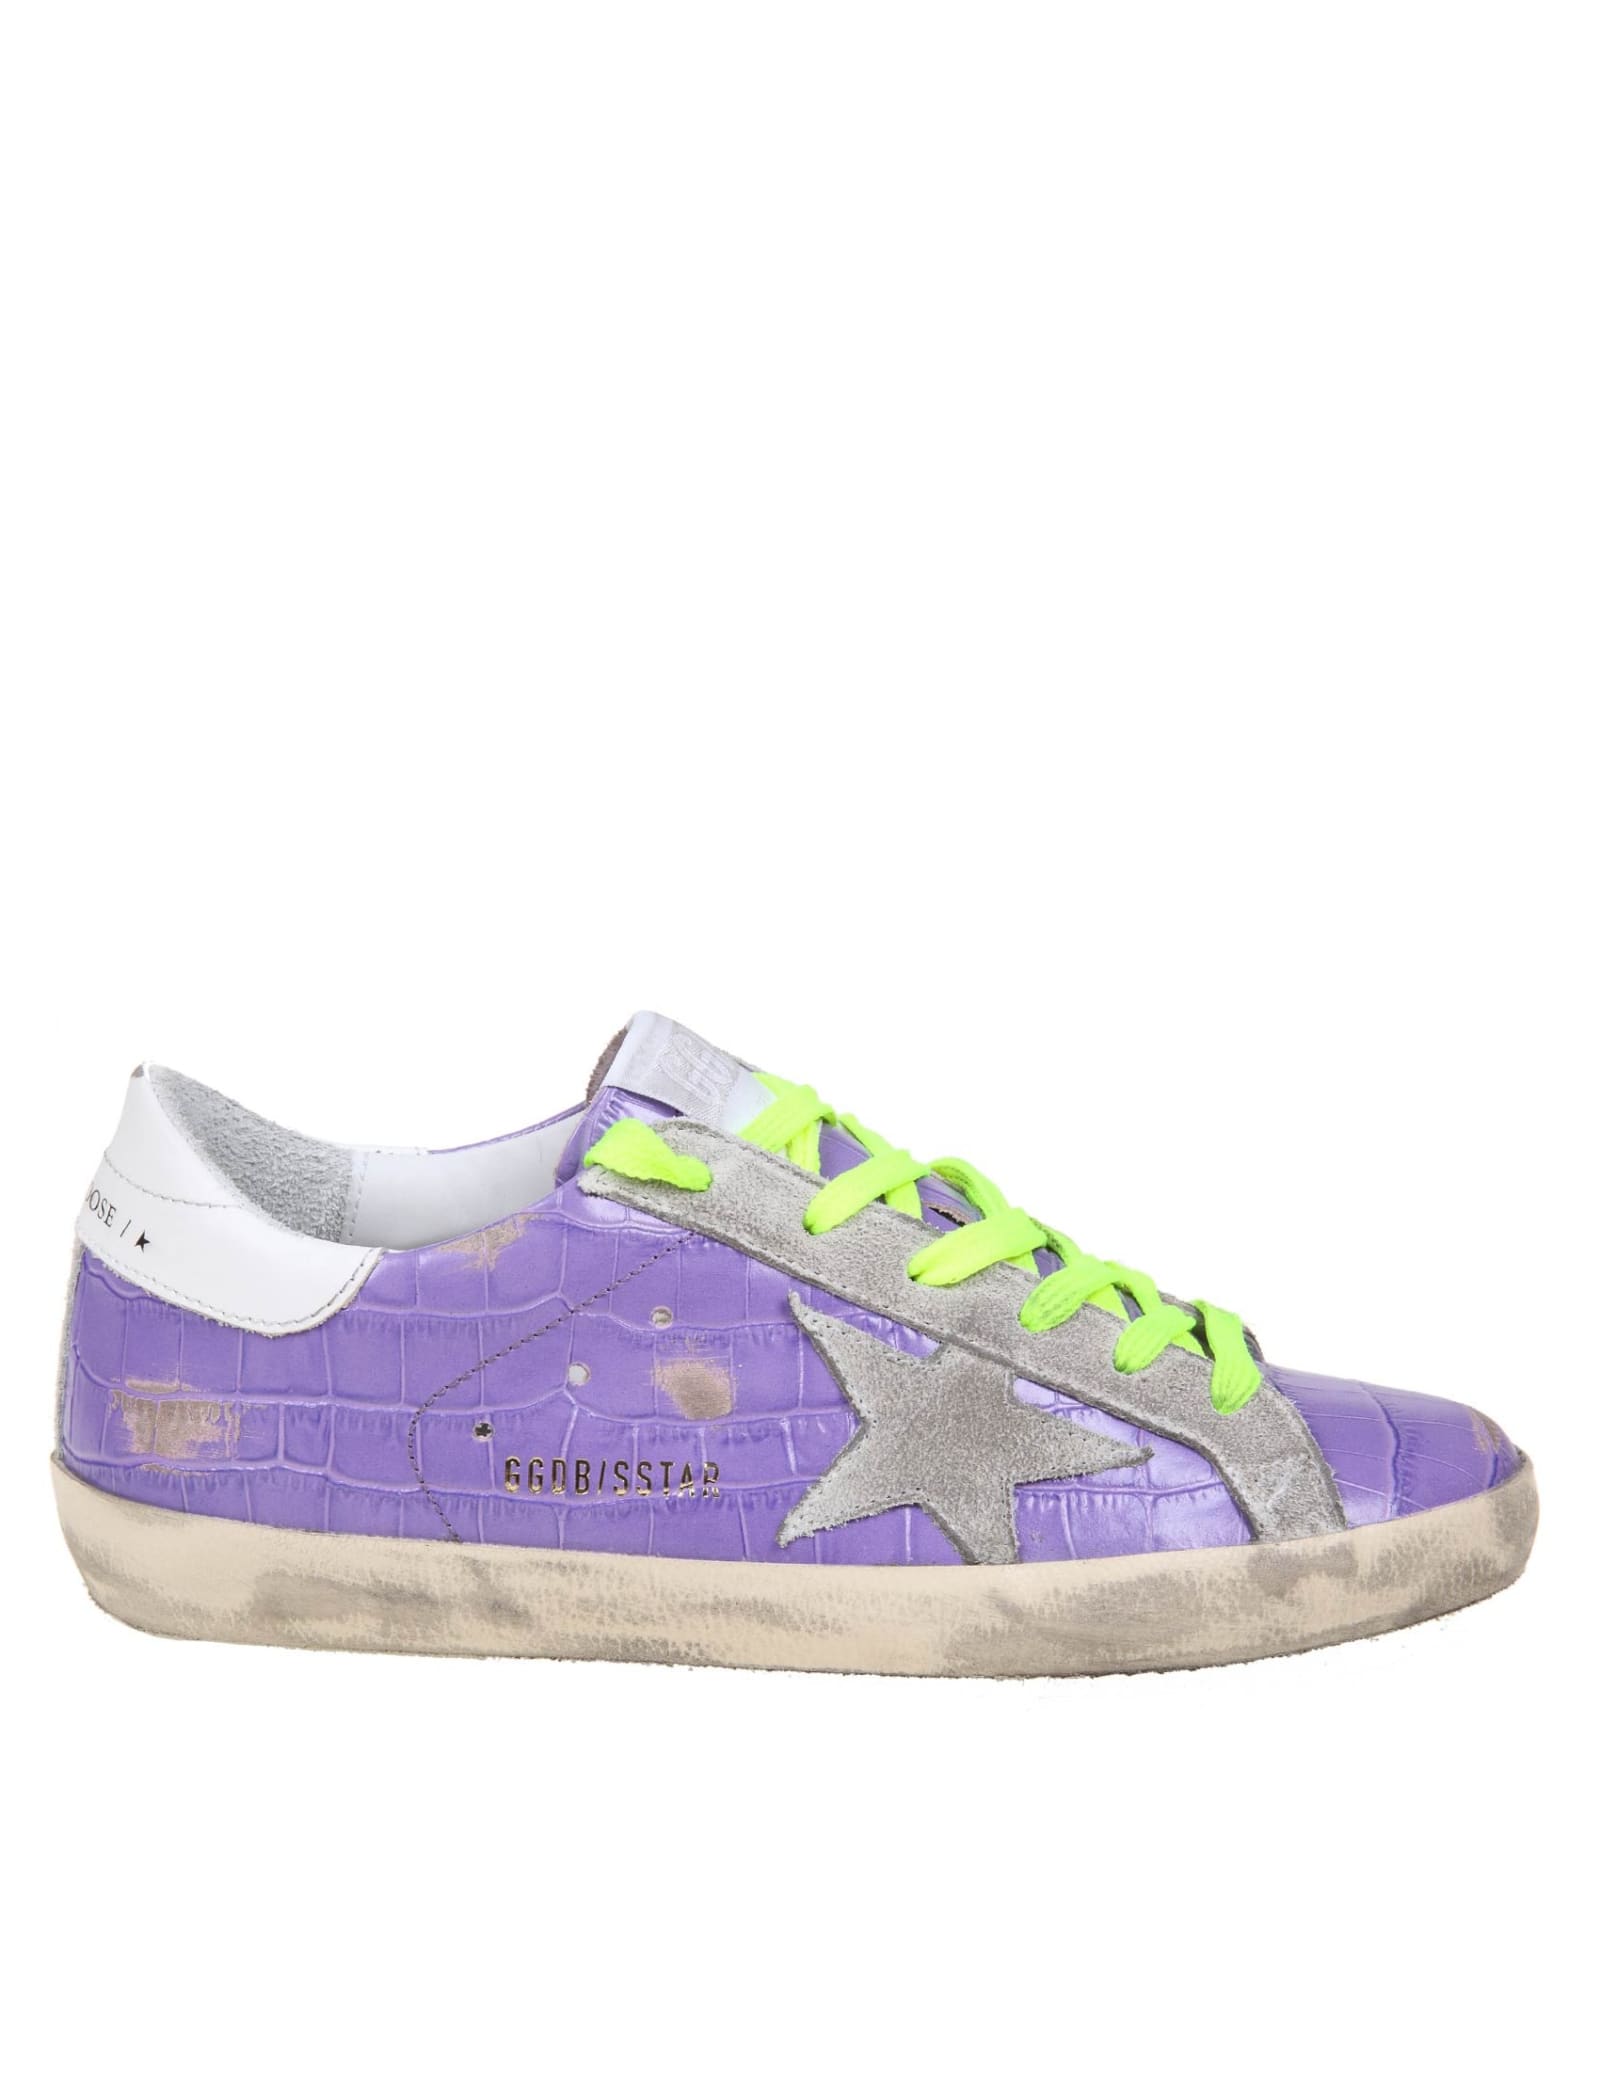 Golden Goose Super Star Sneakers In Purple Leather